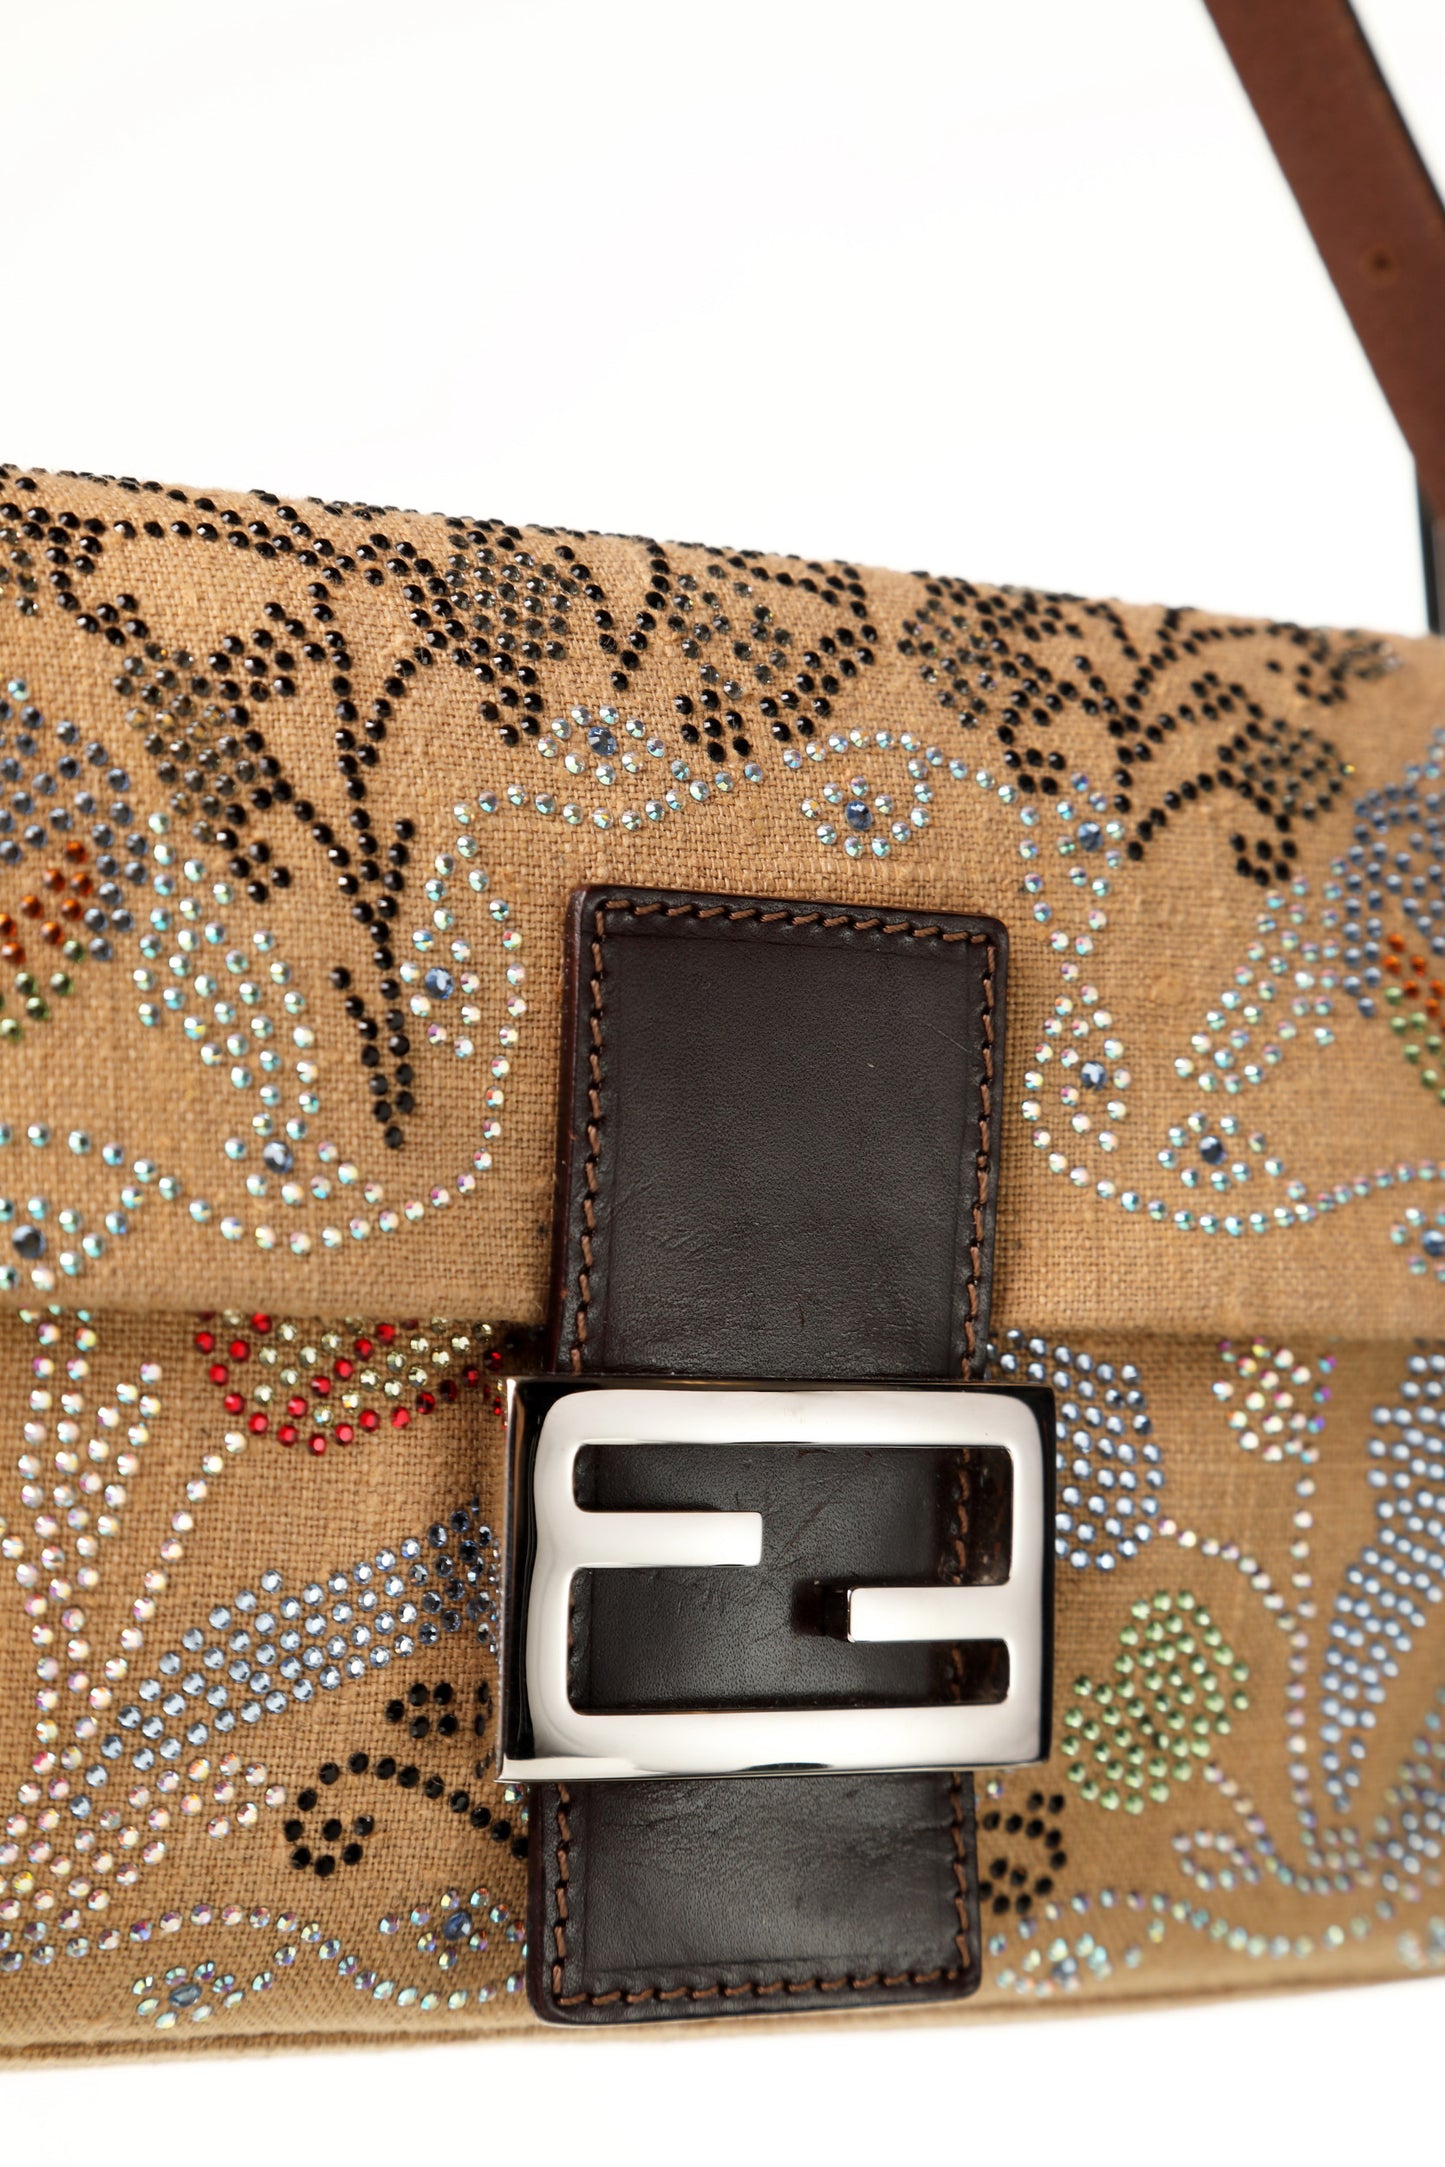 Fendi baguette from the 90s in canvas and Swarovski